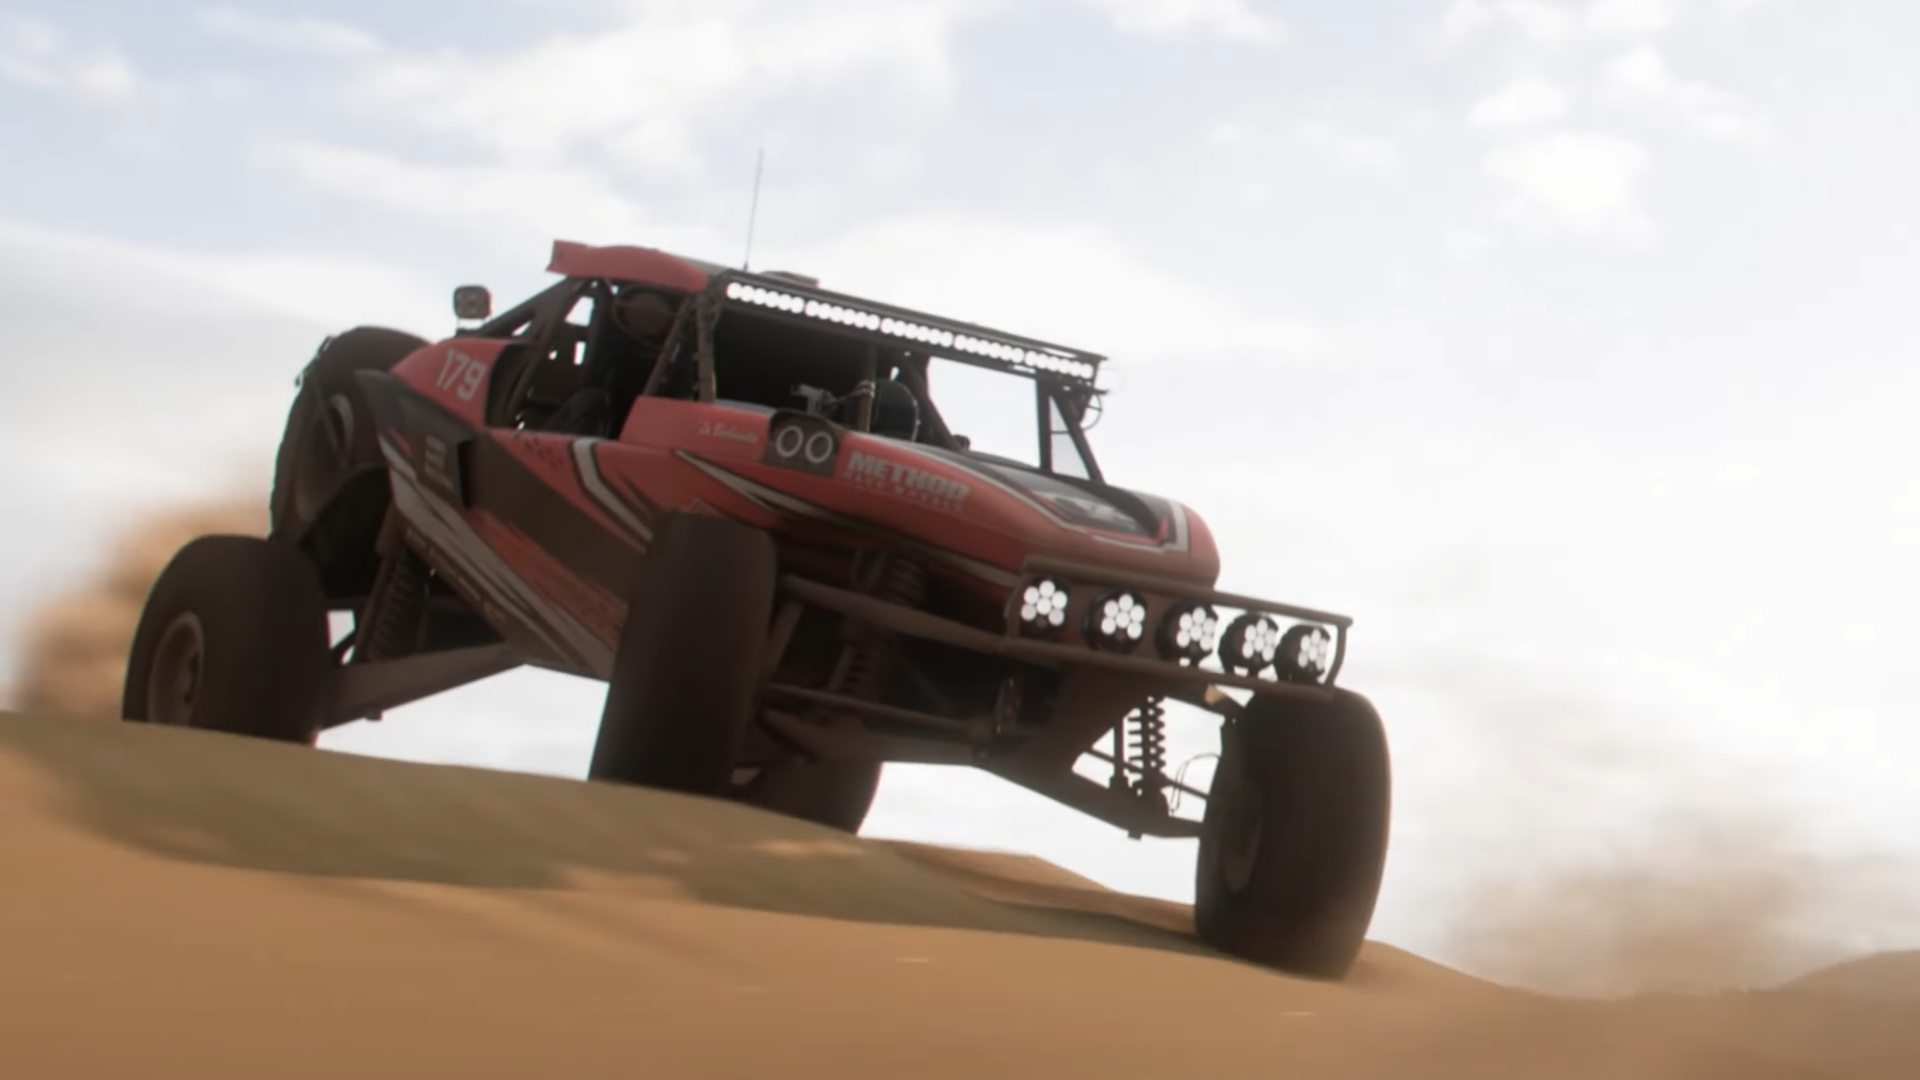 FH5-Rally_Adventure_Expansion-Jimco_240_Fastball_Racing_Spec_Trophy_Truck- Steam-1920x1080_WM-b222a1b54af583b8e569 - Xbox Wire